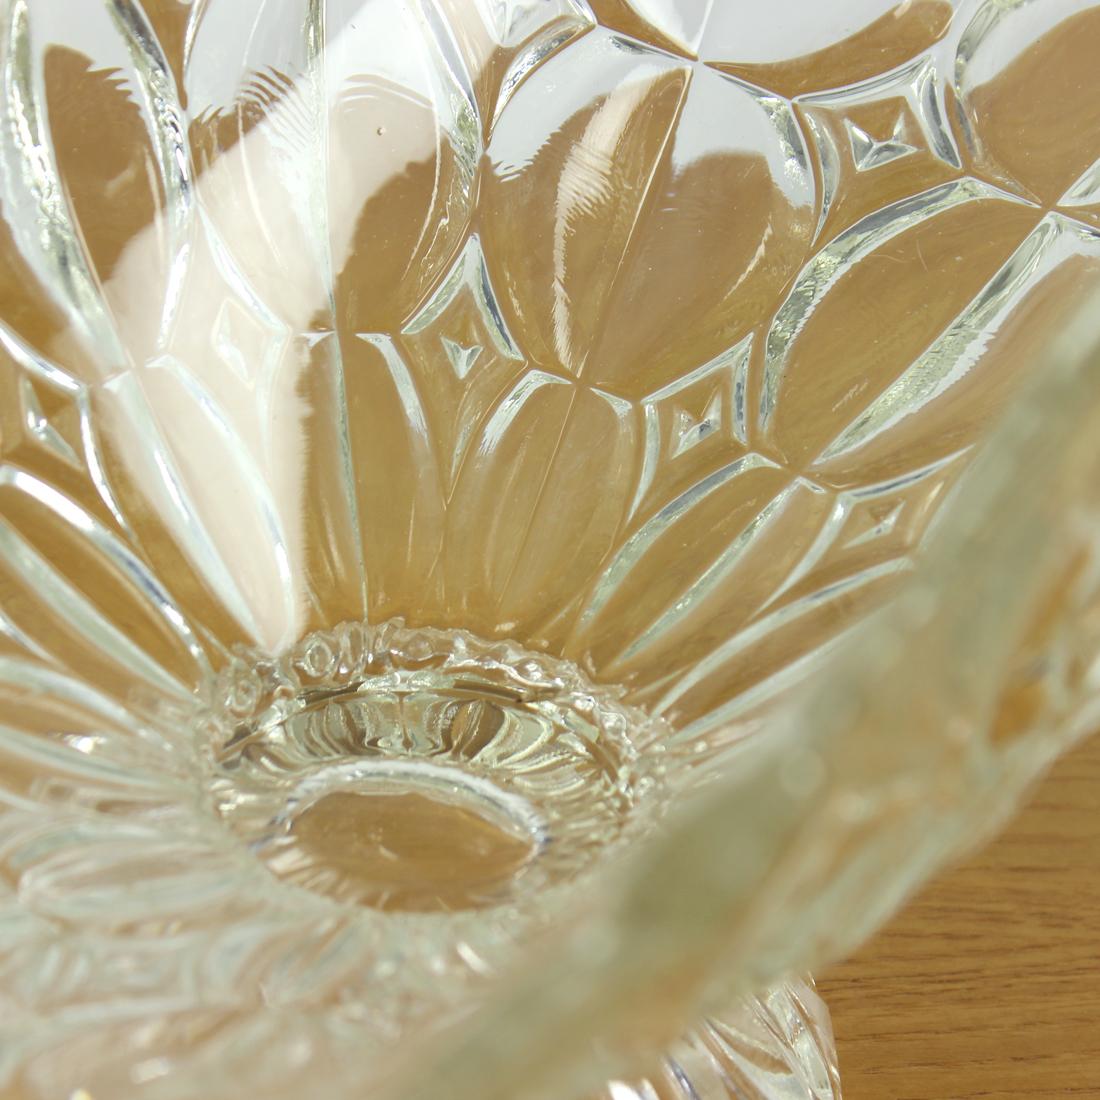 Large Pressed Glass Bowl, Tulip Collection Hermanowa Hut, 1957 For Sale 3